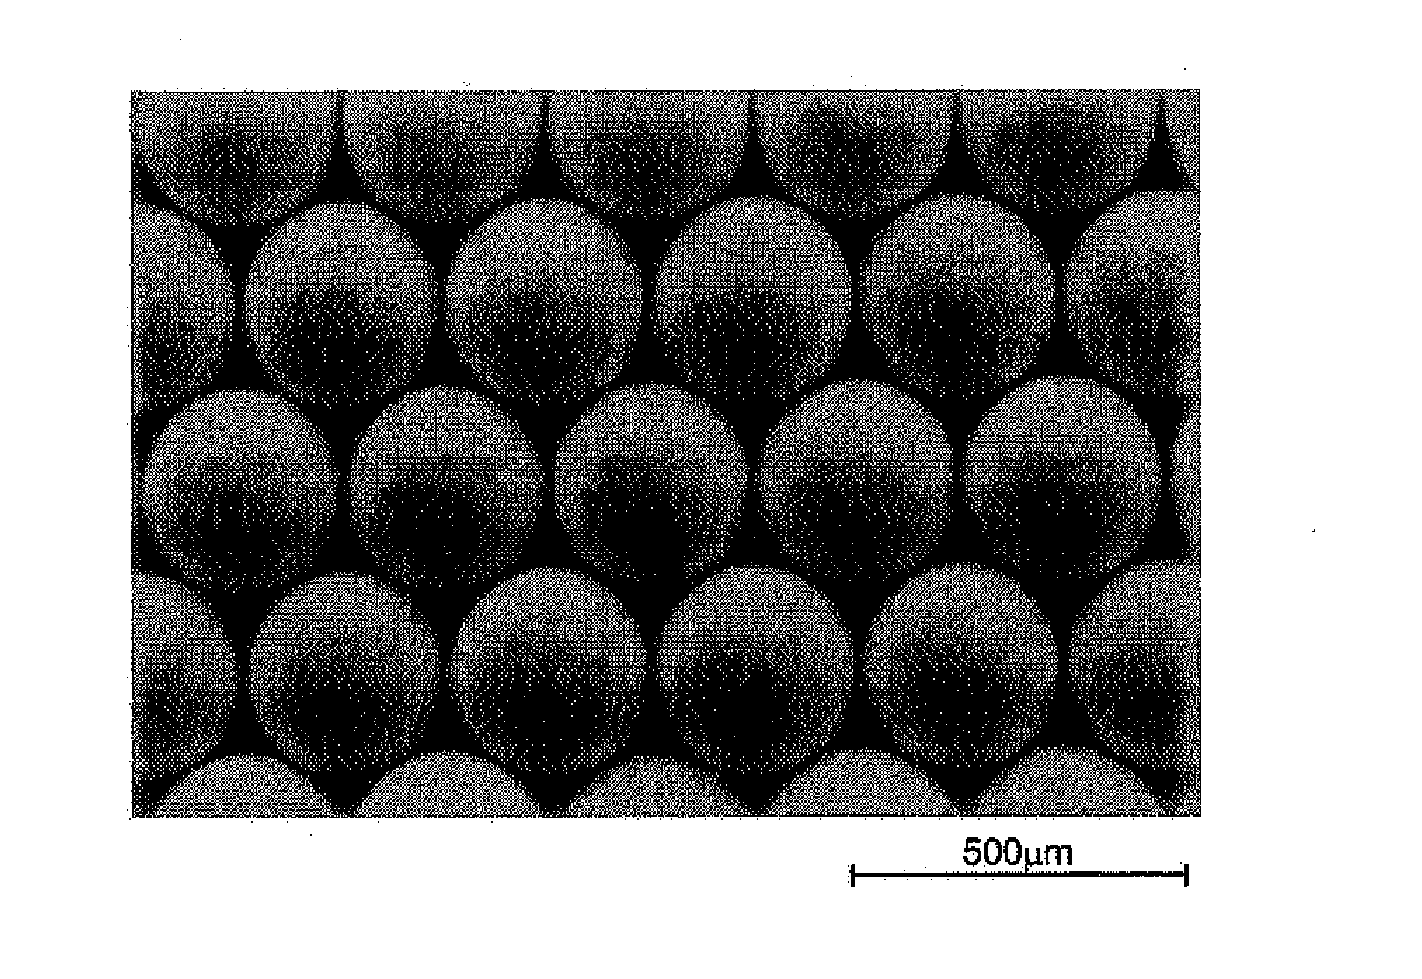 Solder alloy, solder ball, and solder joint using the same